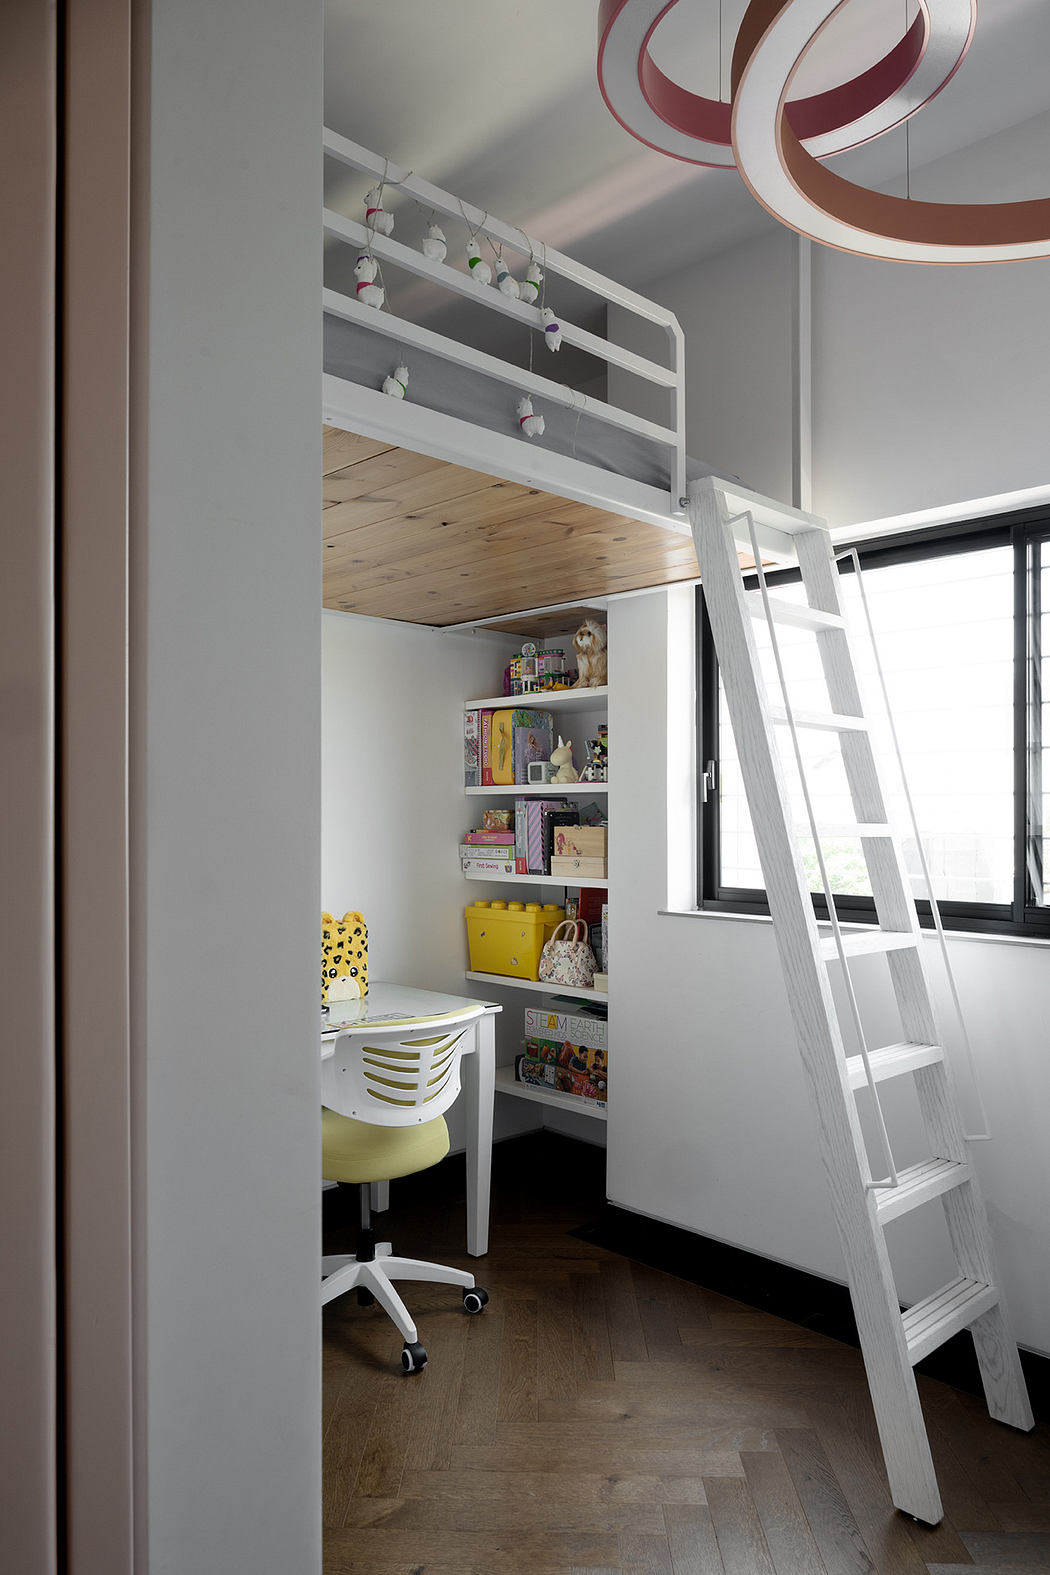 Modern small room with loft bed, desk and chair, and storage shelves.